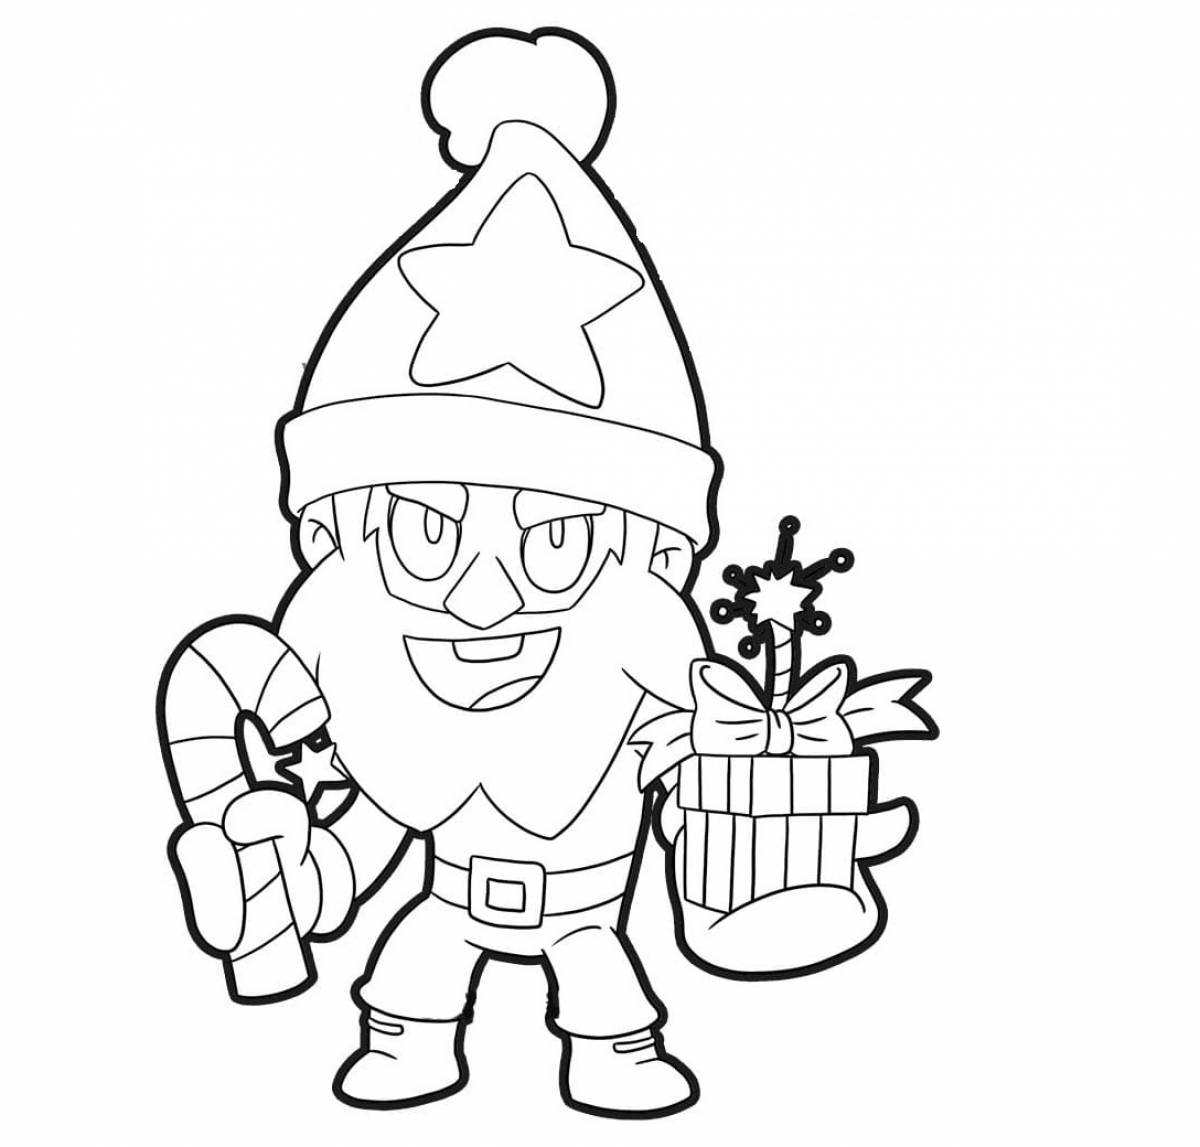 Calming dynamike coloring page